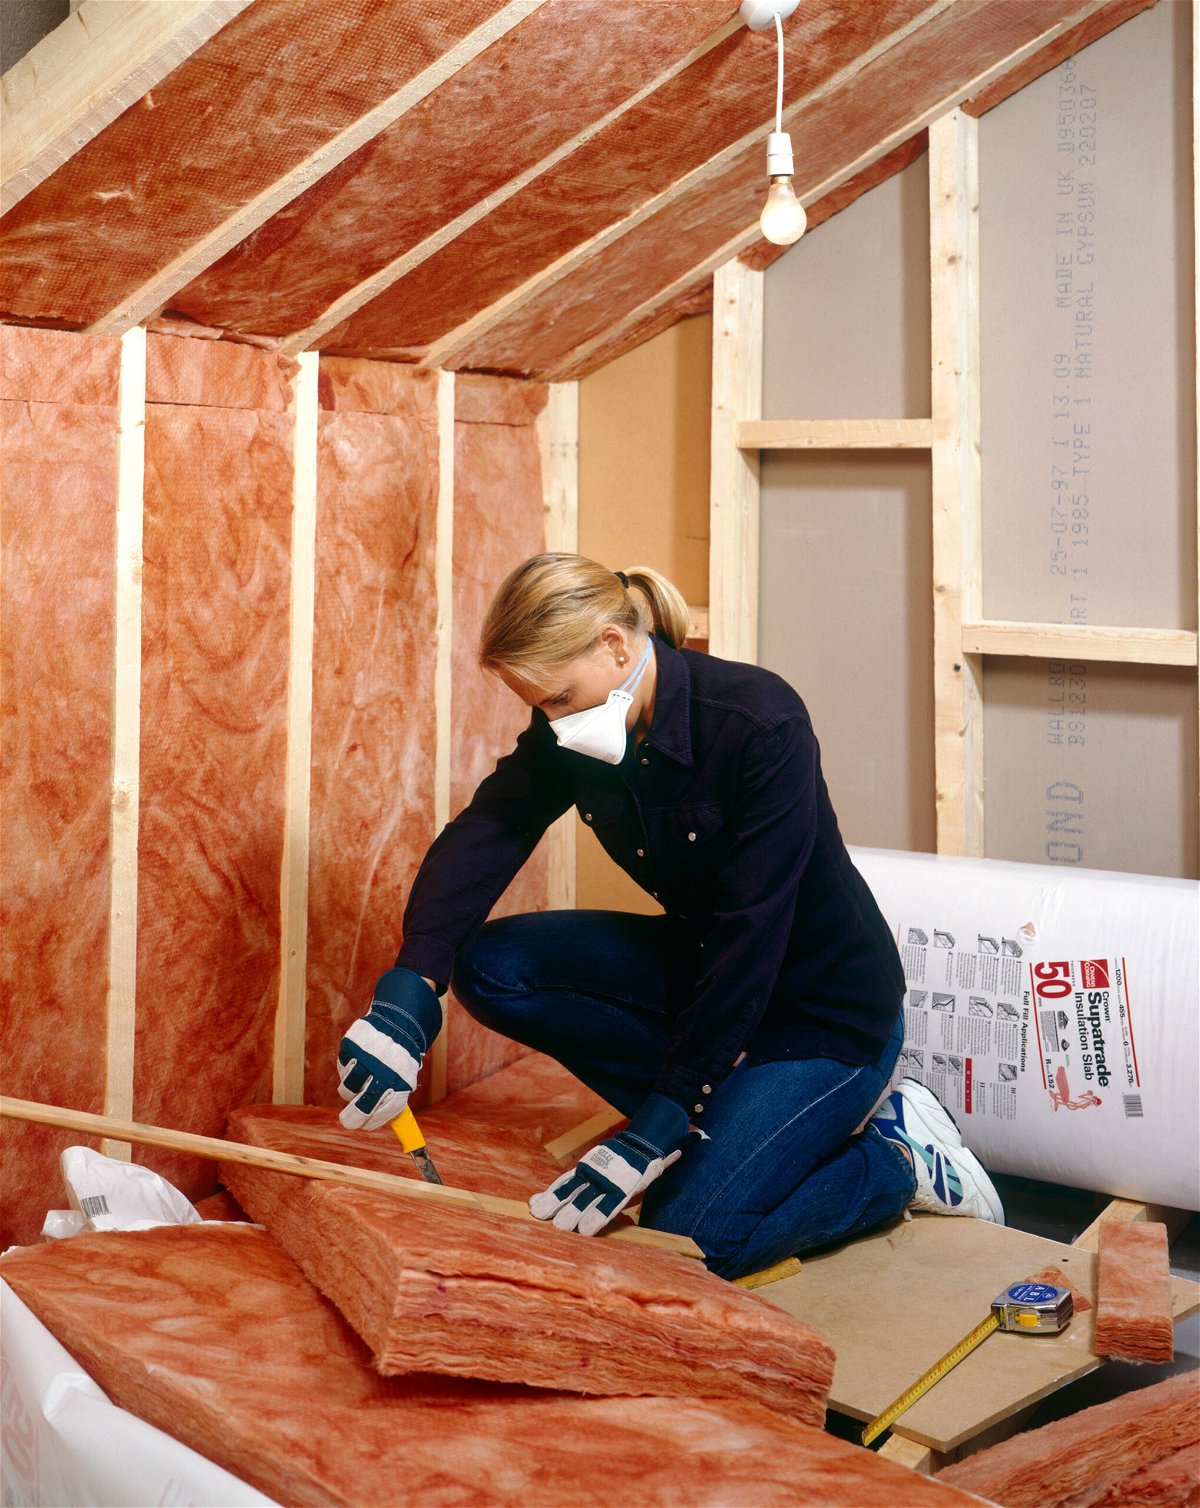 <i>DIY Photolibrary/Construction Photography/Avalon/Getty images</i><br/>Around one-third of all heat lost in an uninsulated home escapes through the walls.